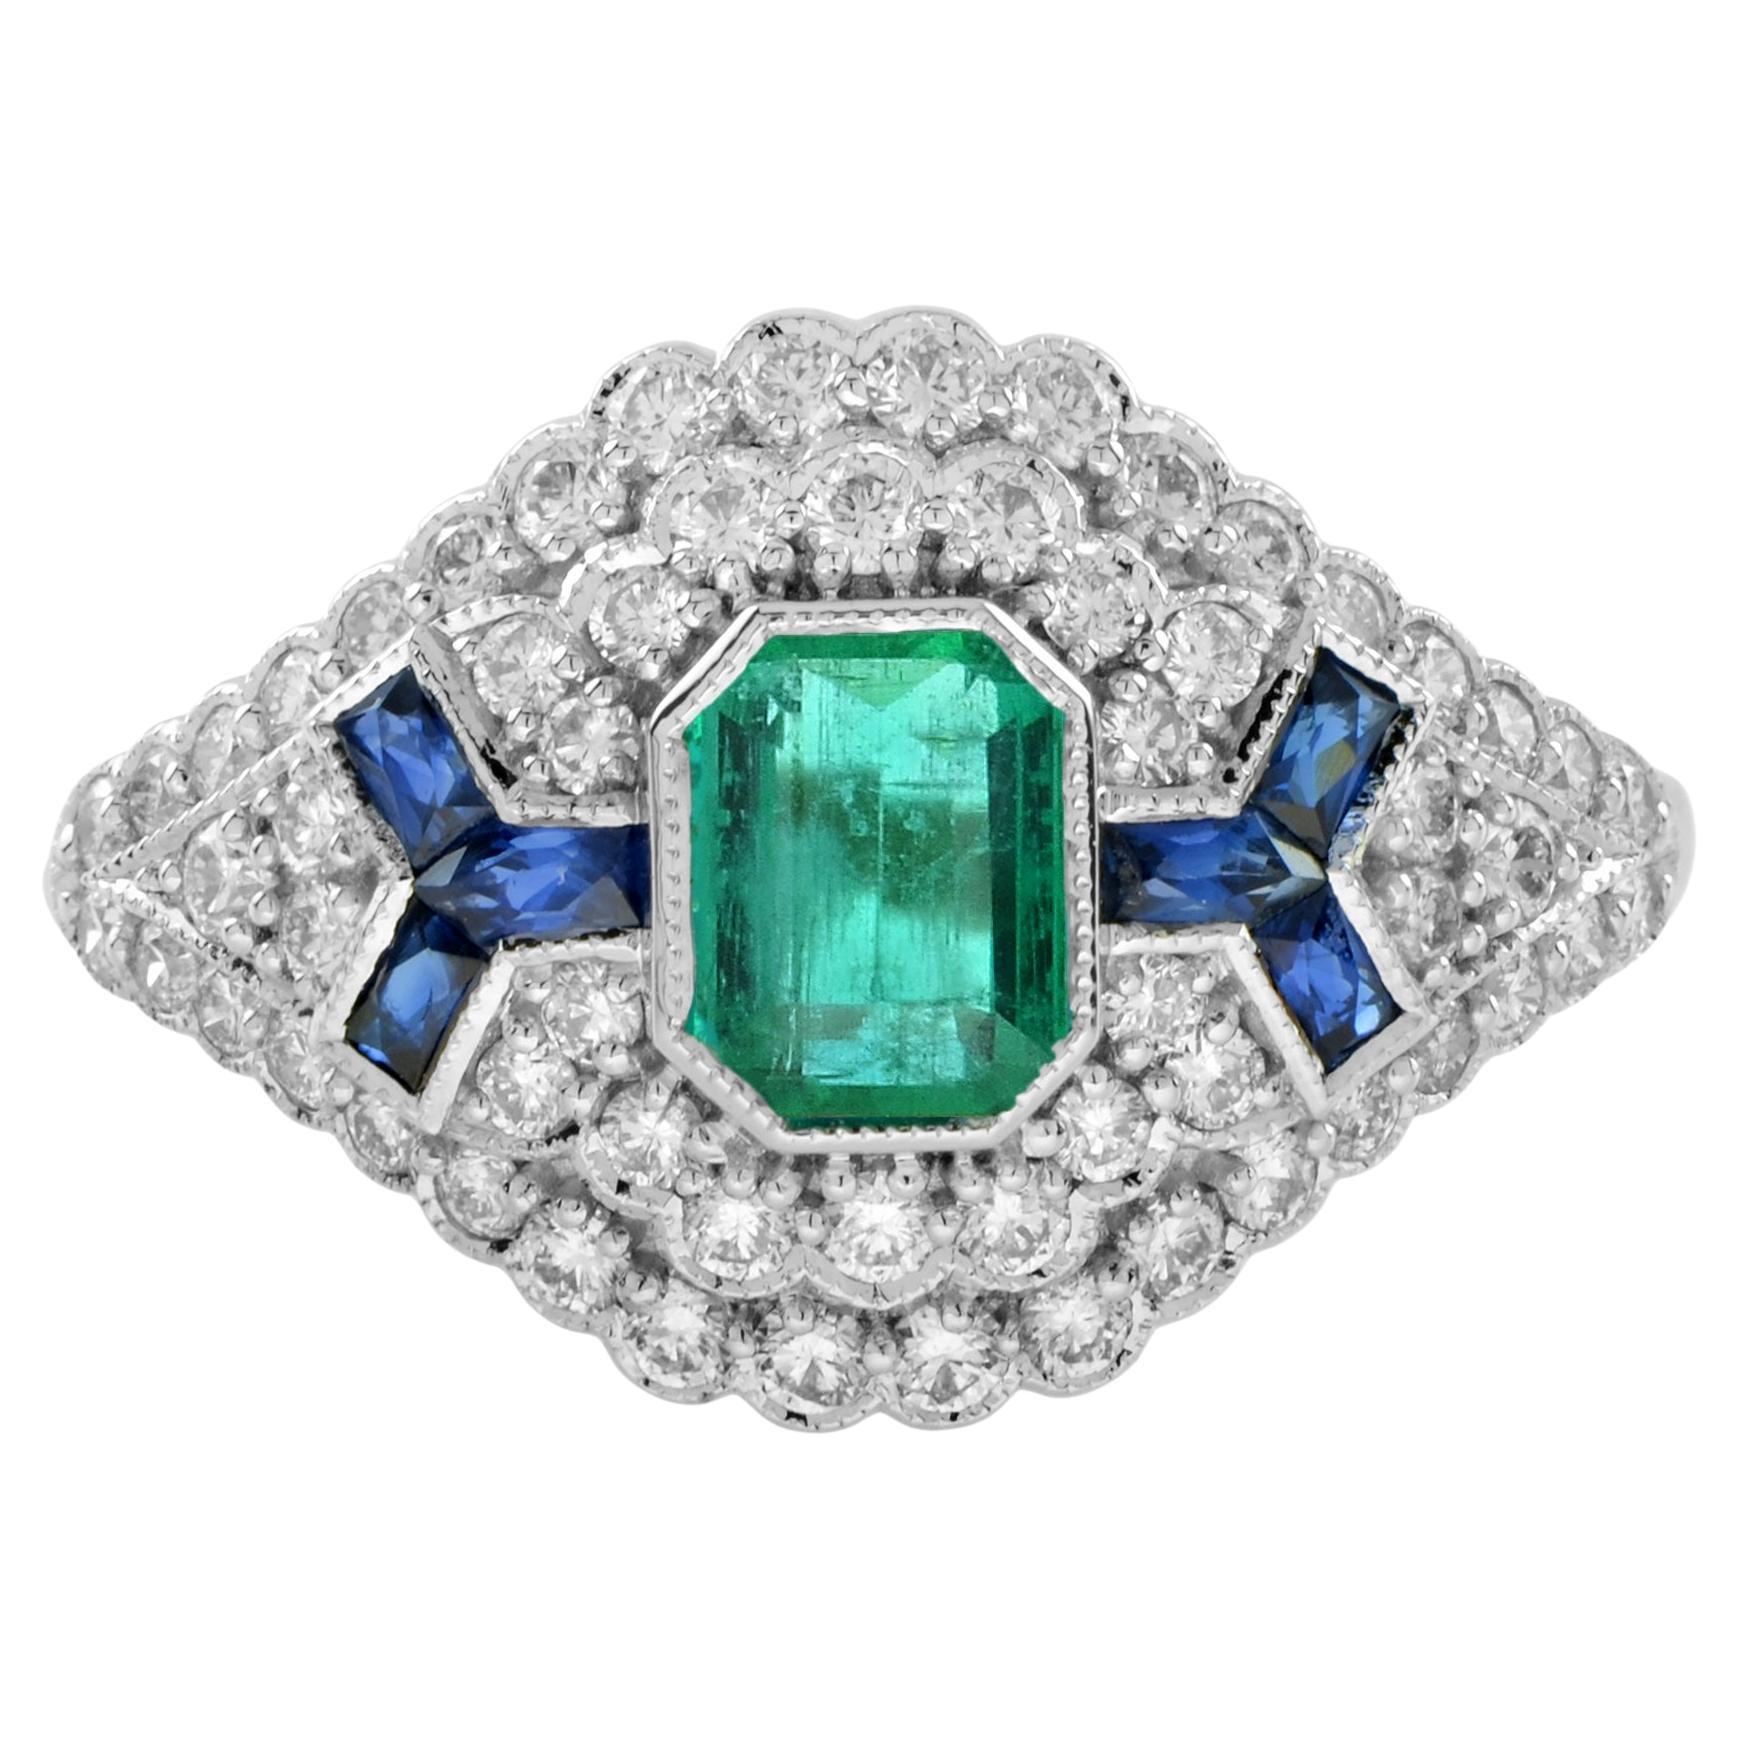 Emerald Sapphire Diamond Art Deco Style Engagement Ring in 18K White Gold